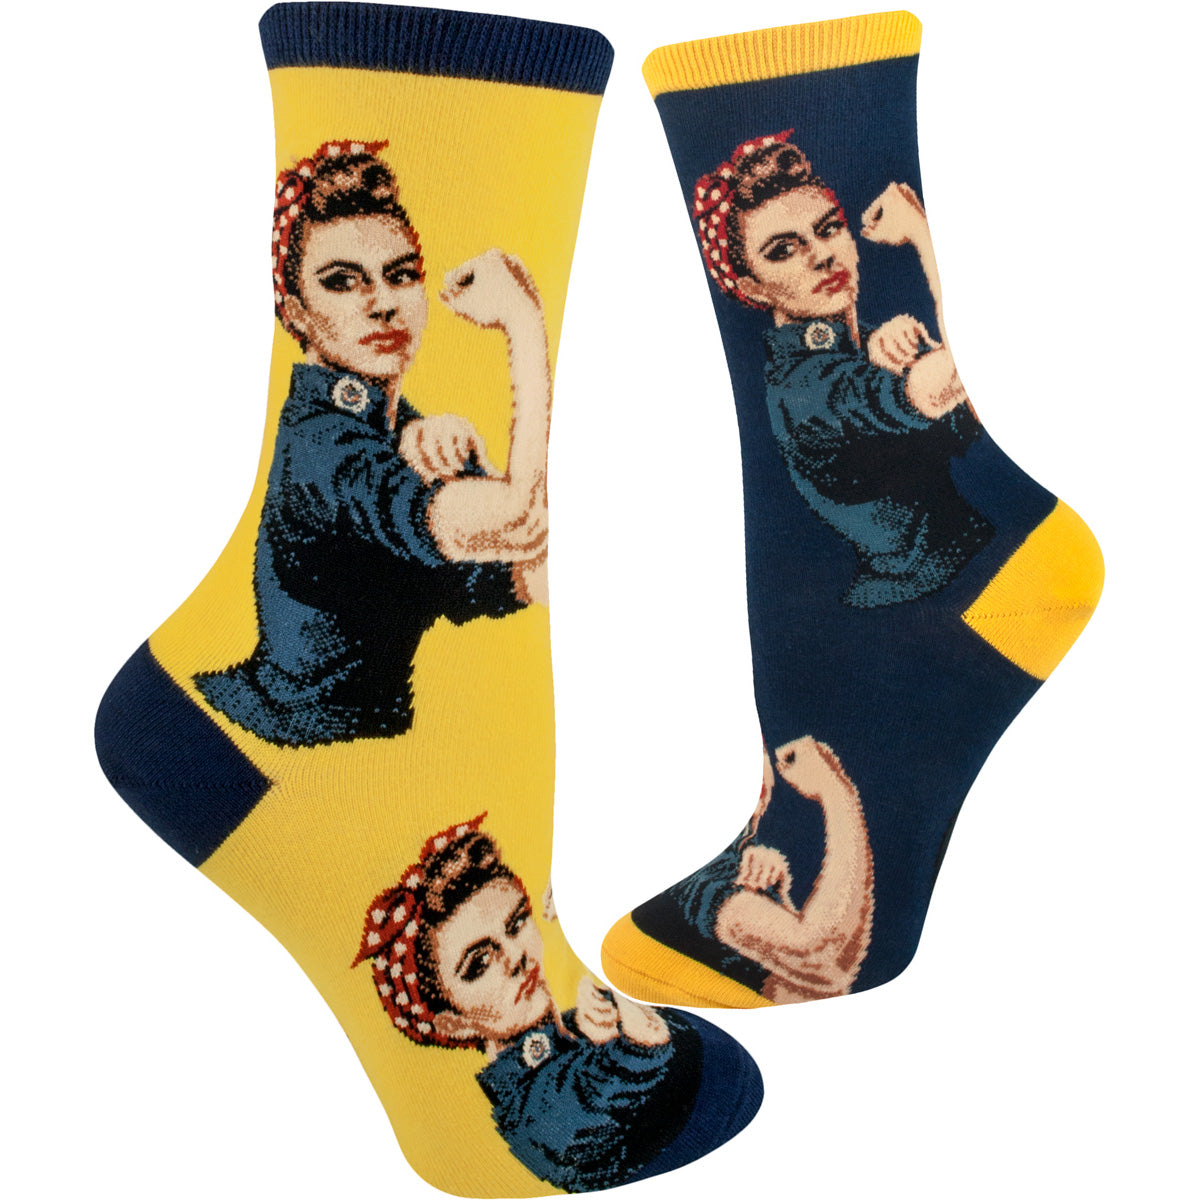 Rosie the Riveter Socks in yellow and navy color options feature the WWII-era poster icon Rosie in her "We Can Do It" pose, and wearing her navy overalls and red polka-dot bandana.